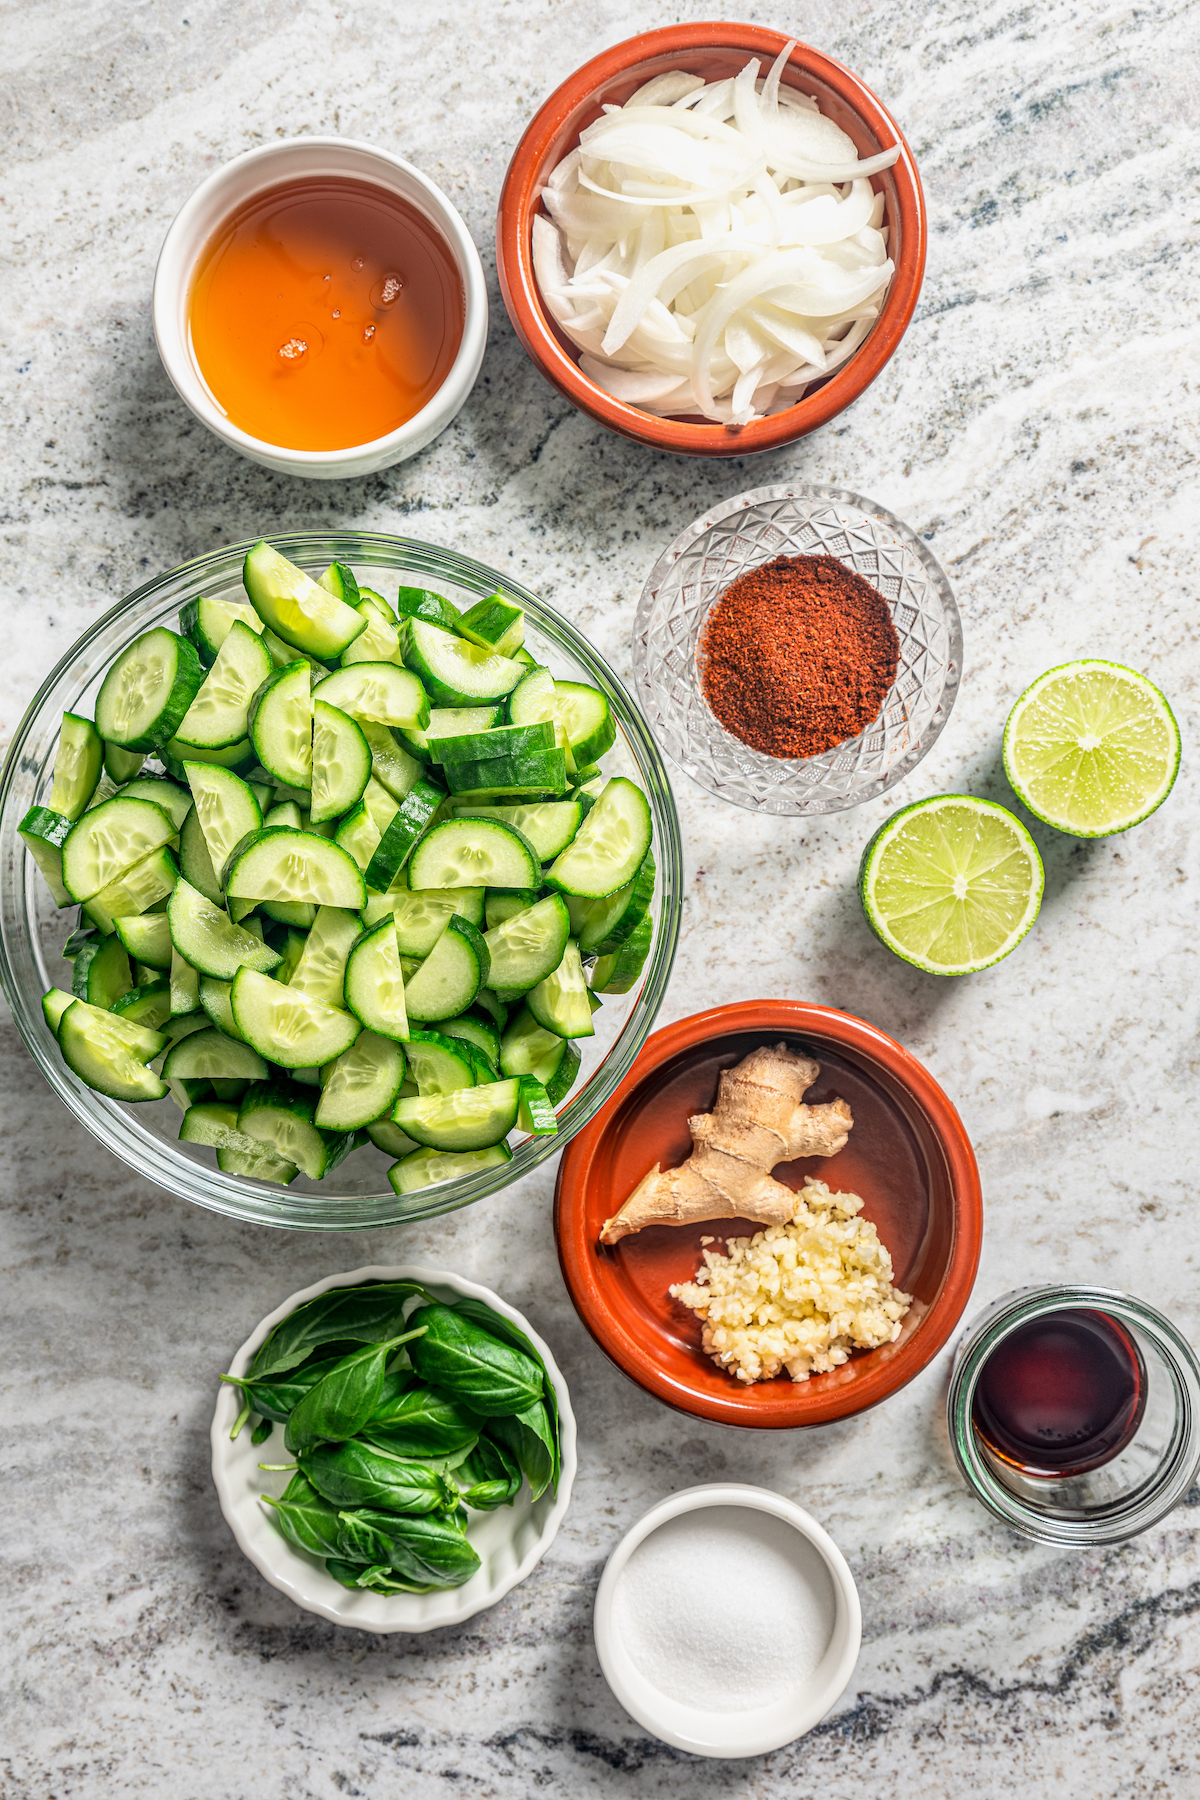 Ingredients for cucumber kimchi. 